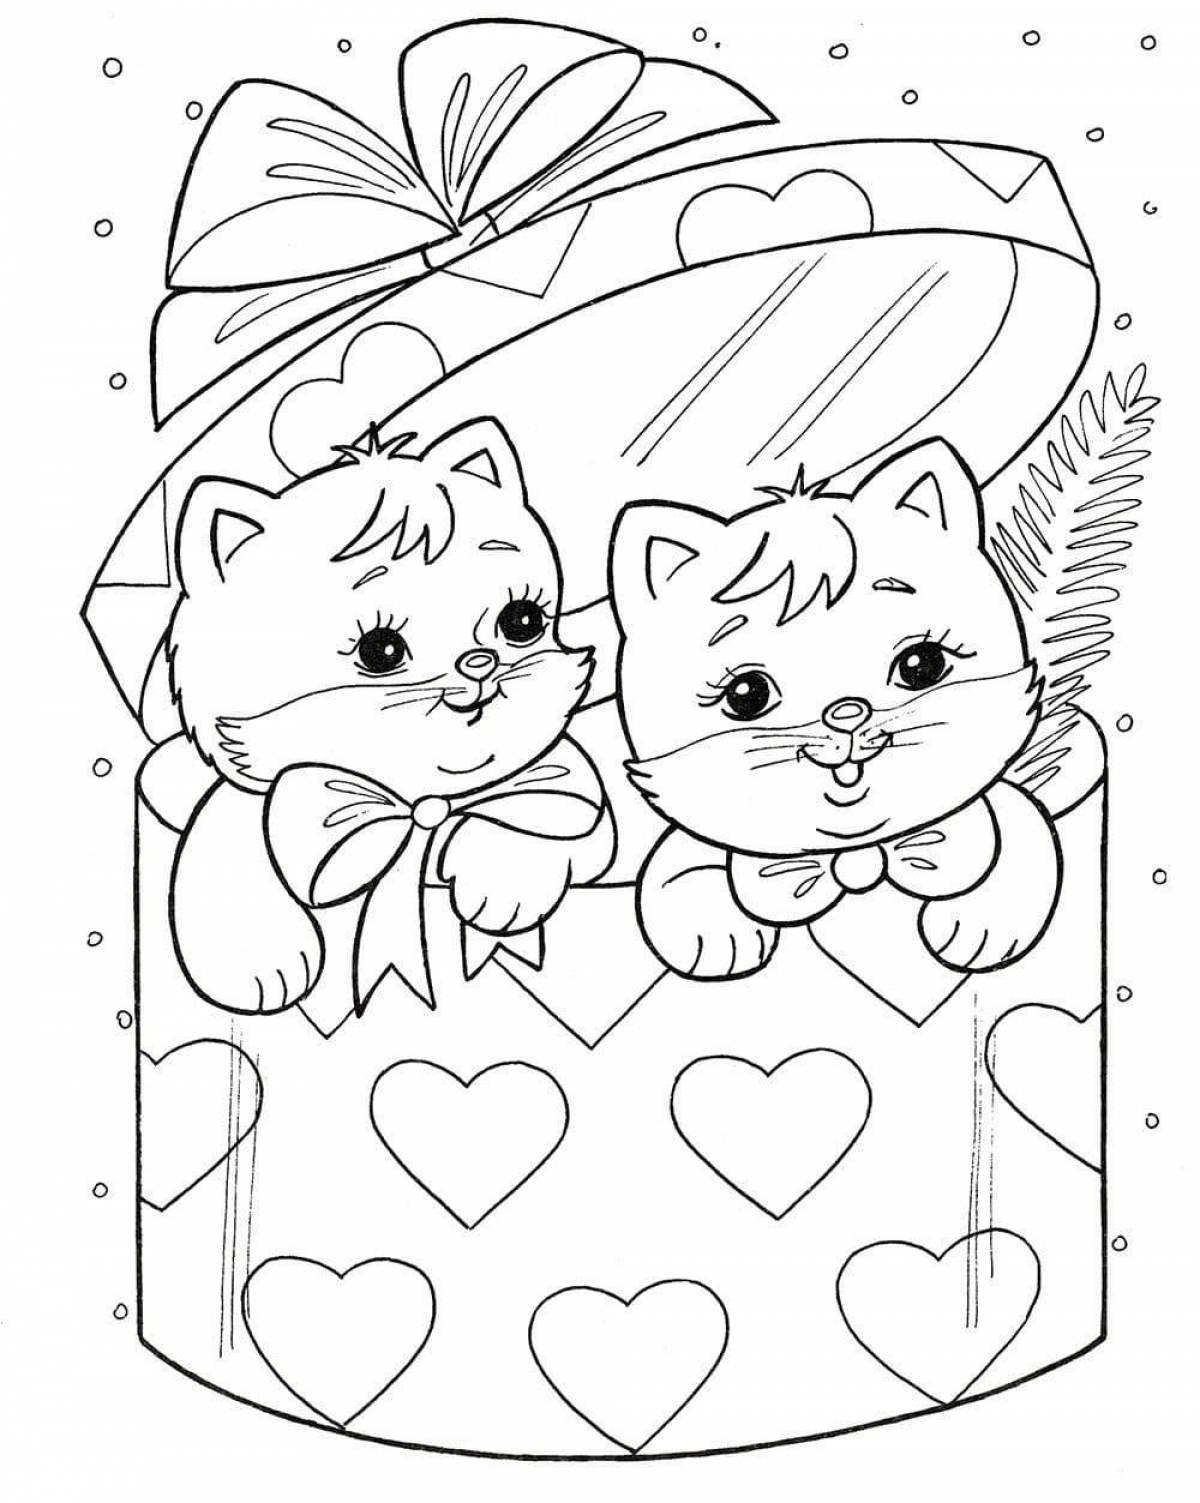 Fluffy coloring book for cat girls